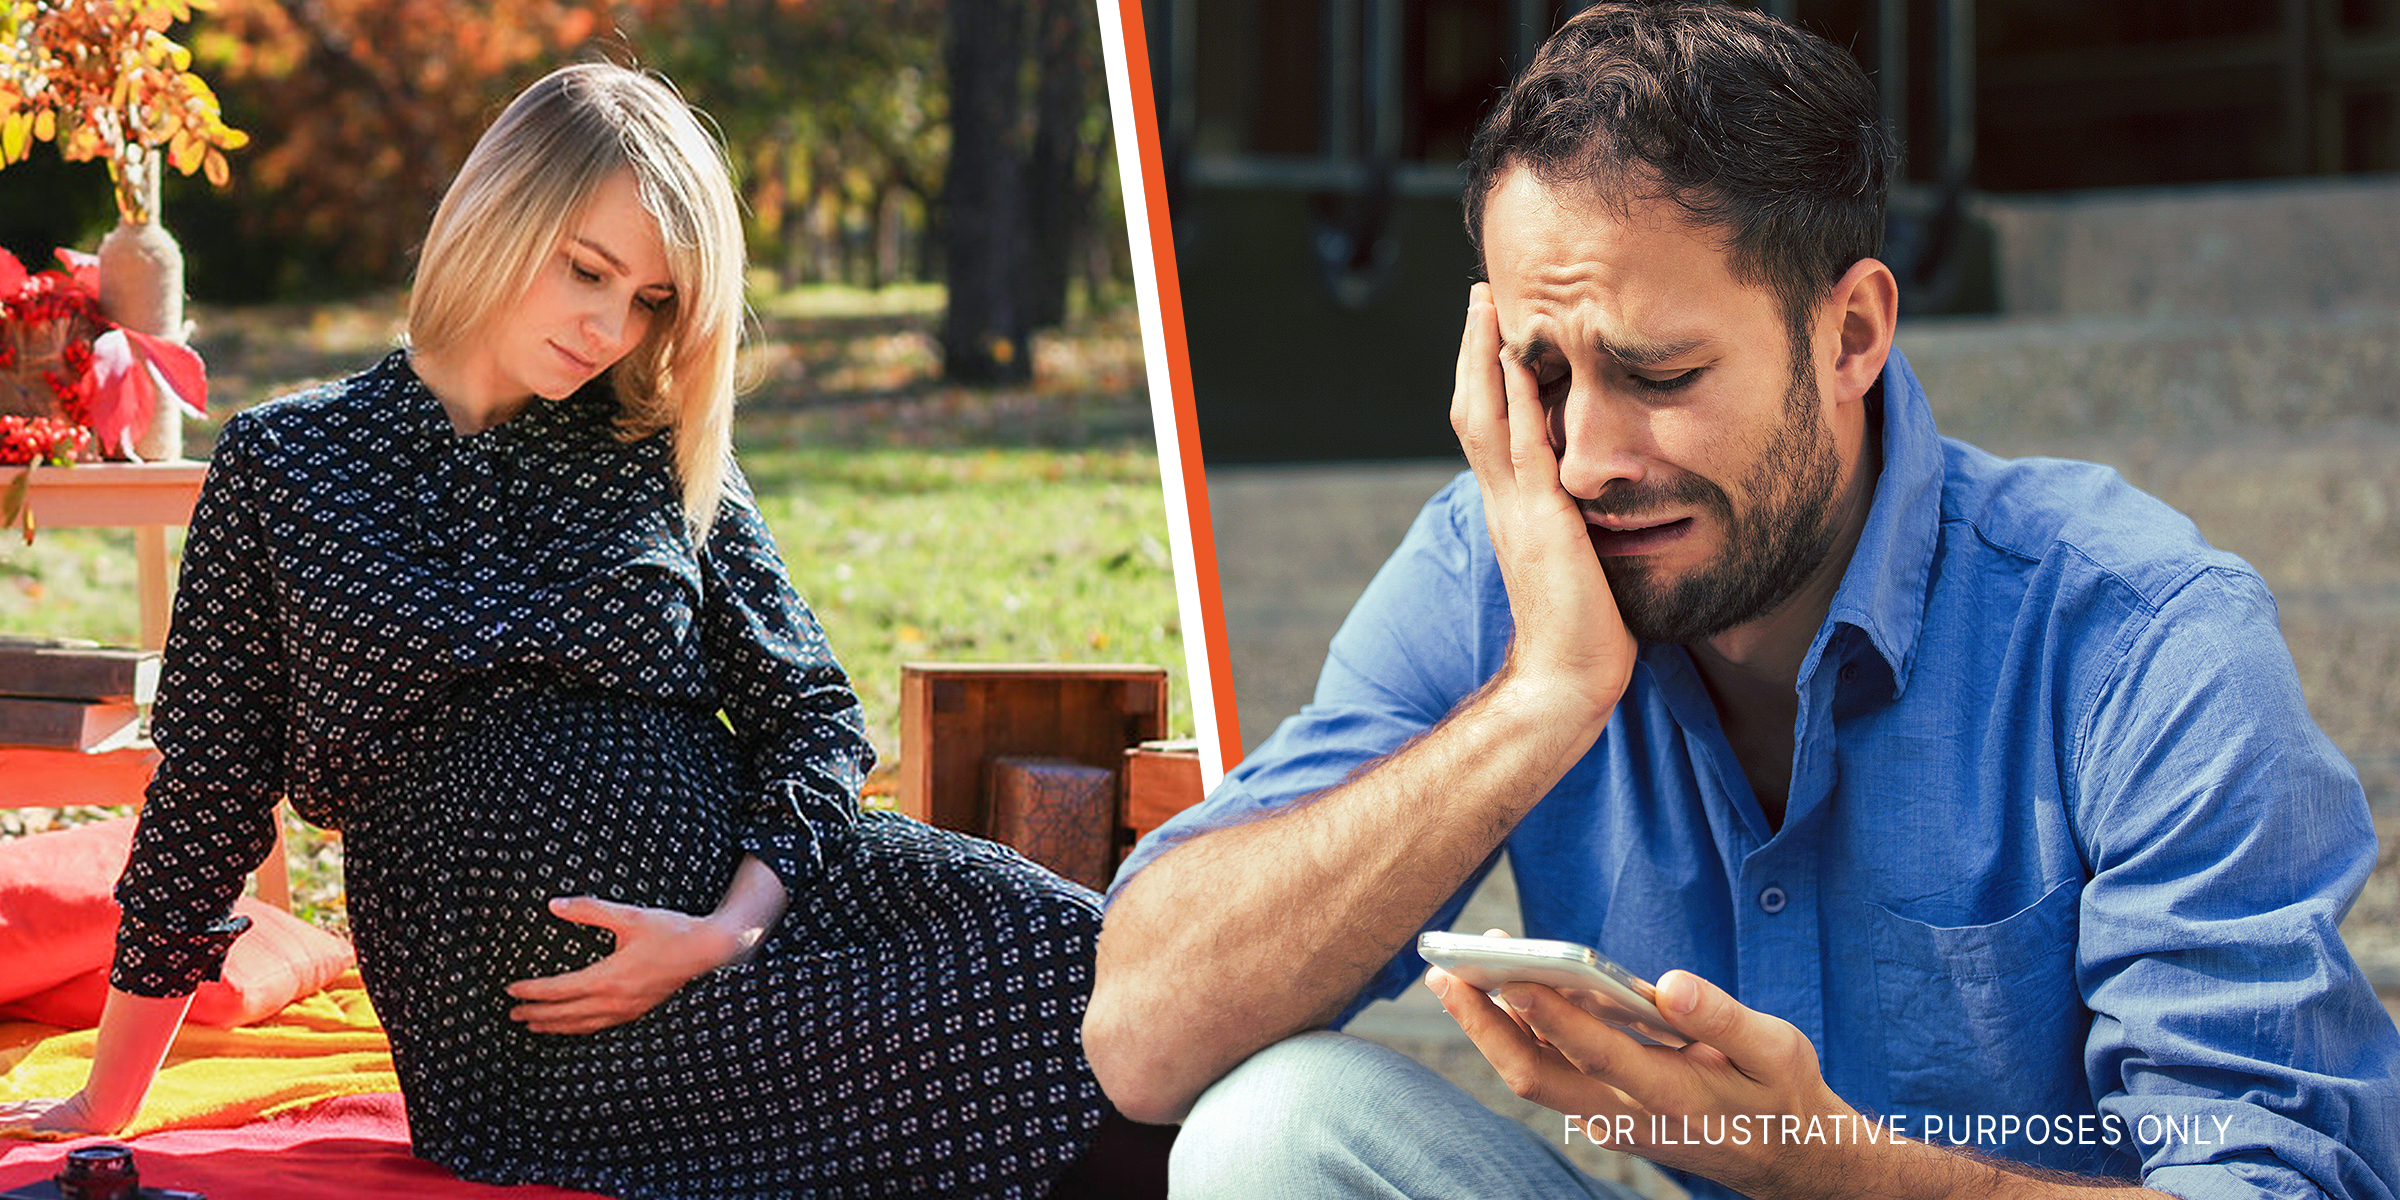 A pregnant woman | A crying man | Source: Shutterstock | flickr.com/10streets/CC BY 2.0